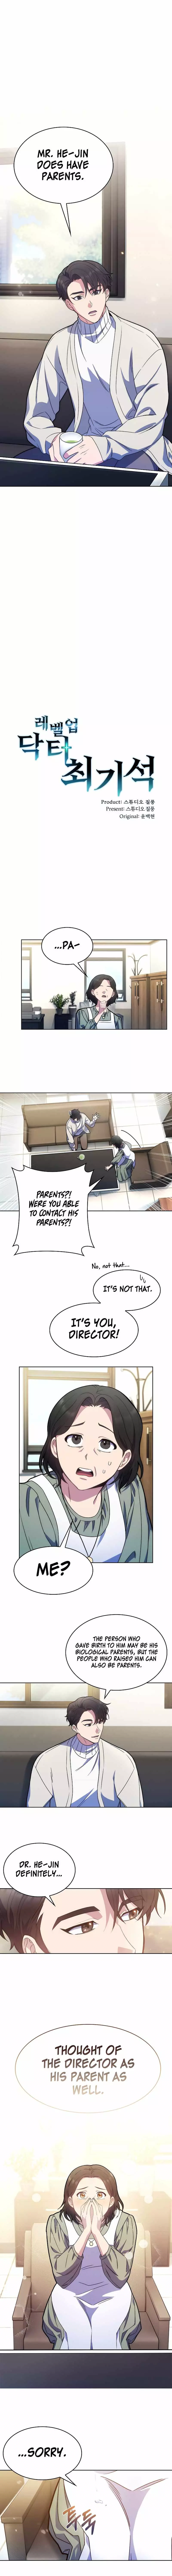 Level-Up Doctor (Manhwa) - 7 page 2-9fbb2748